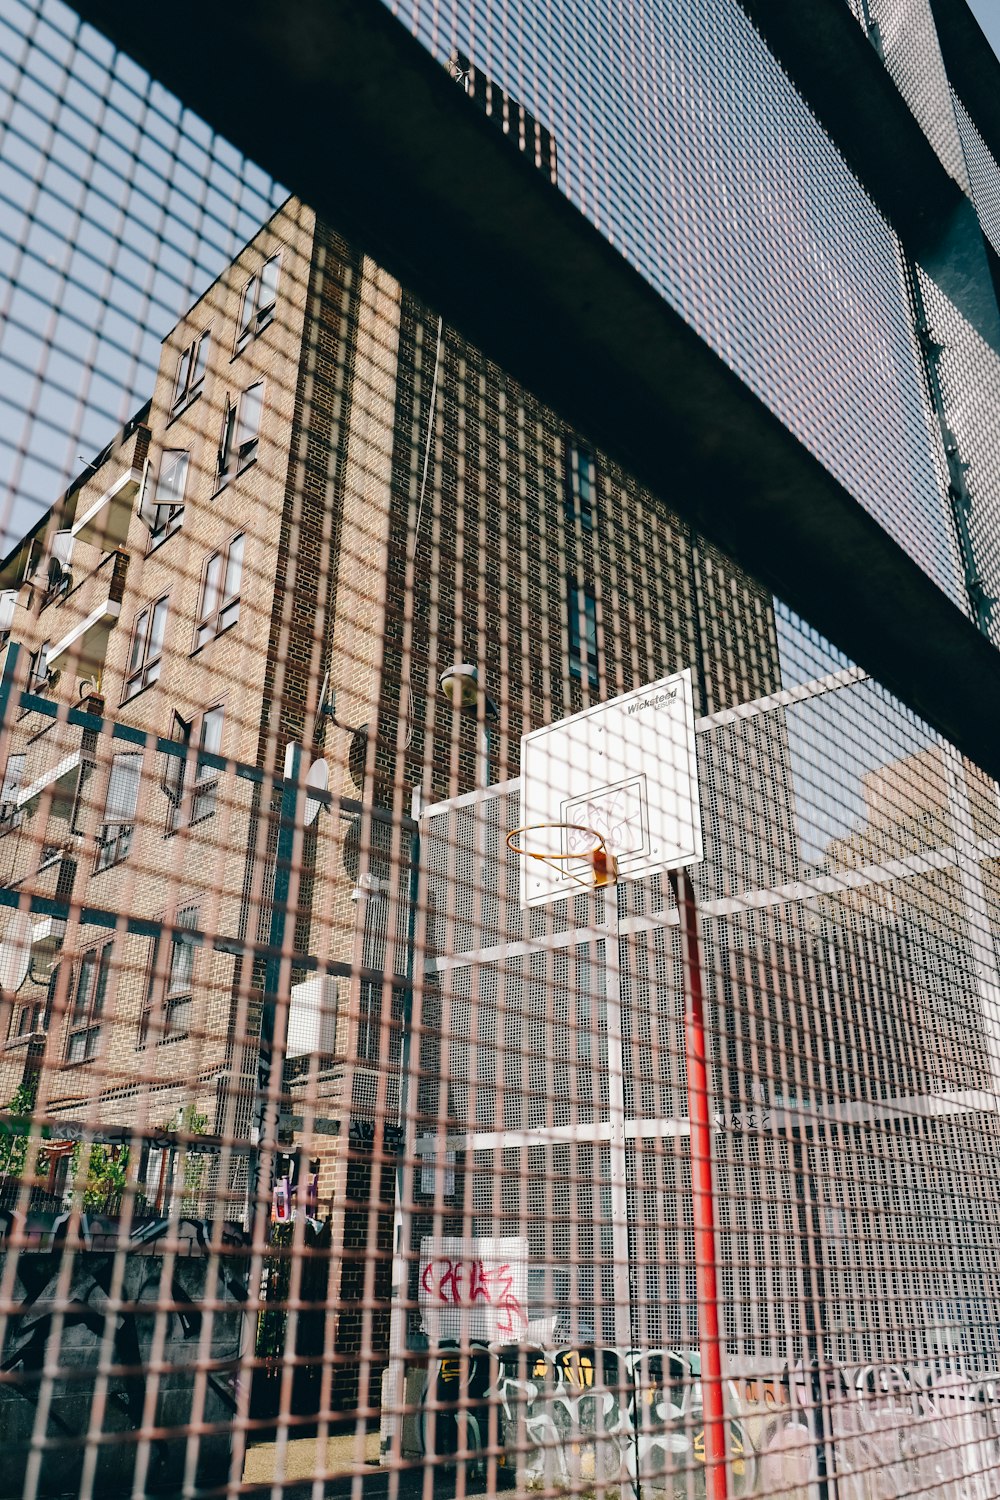 a view of a basketball court through a fence